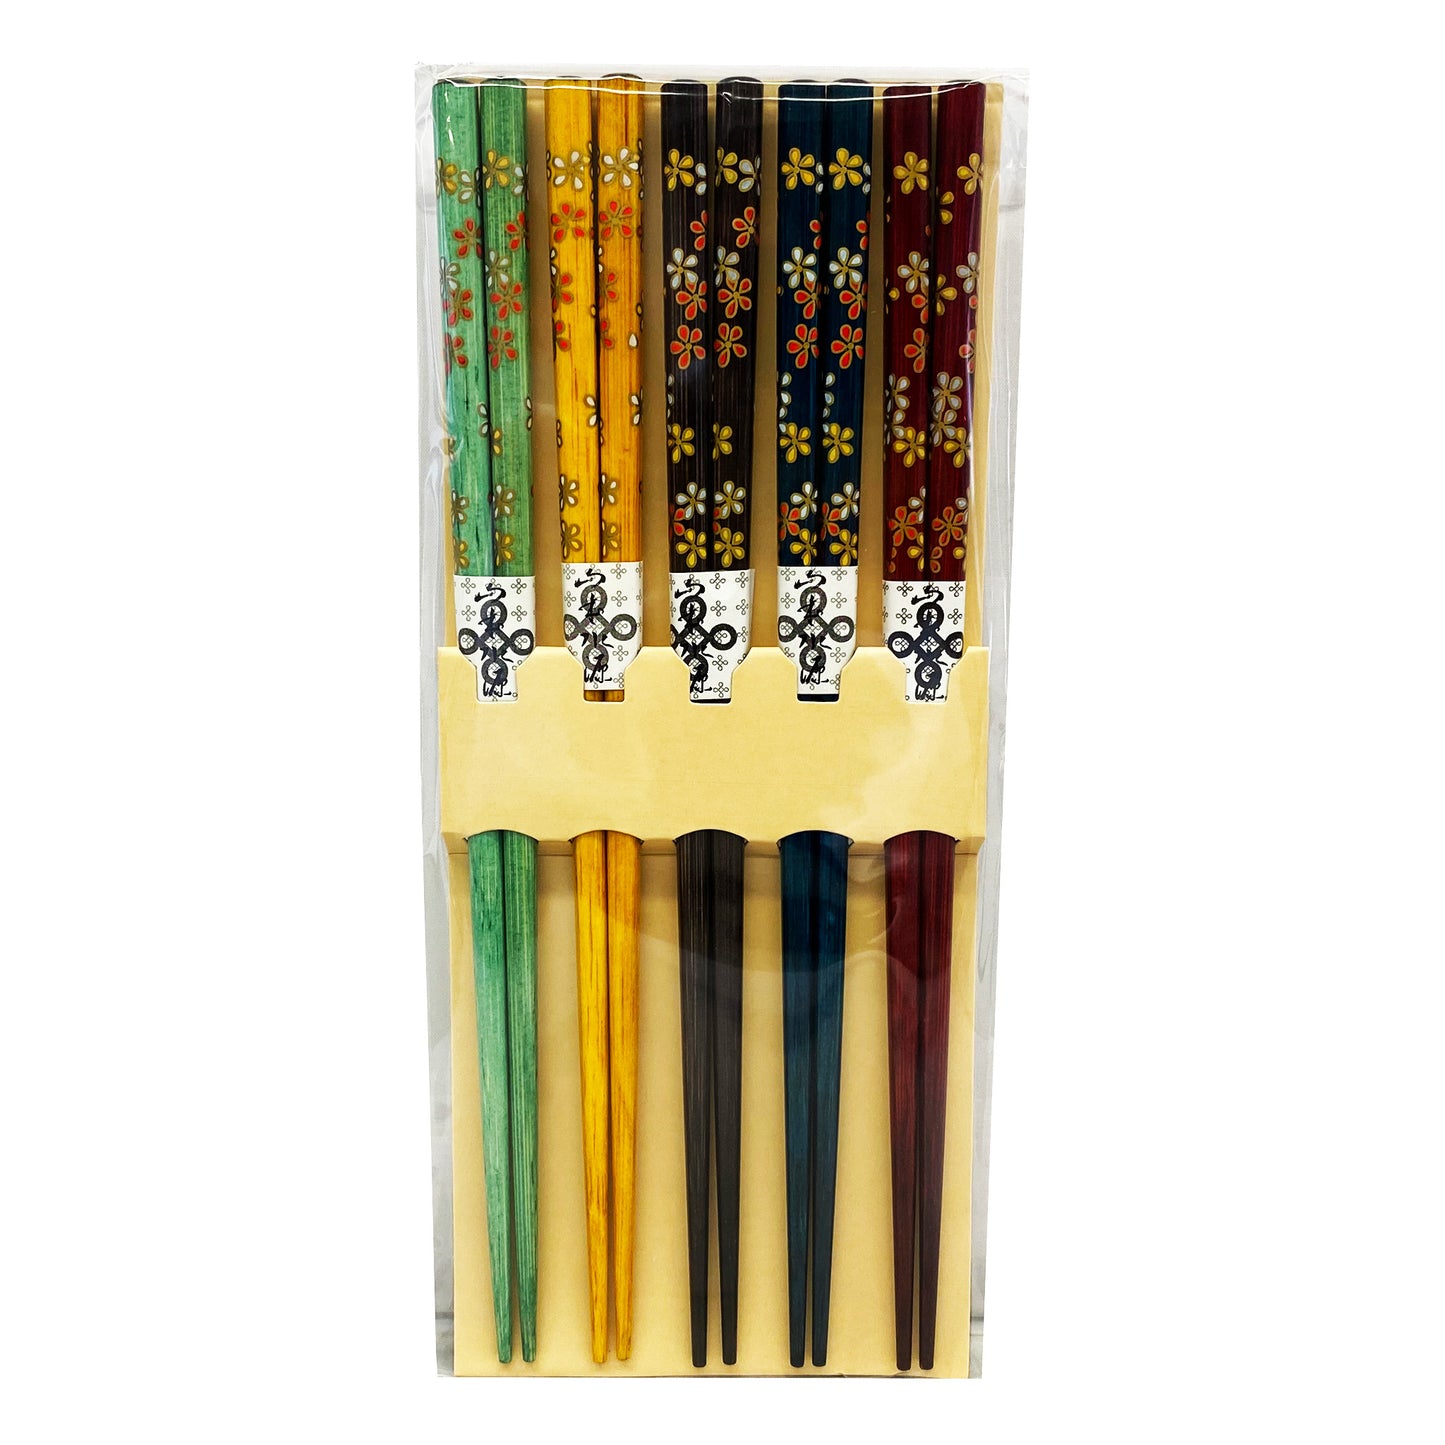 Front graphic view of Wooden Square Chopsticks - Assorted Flower (5 Sets) 